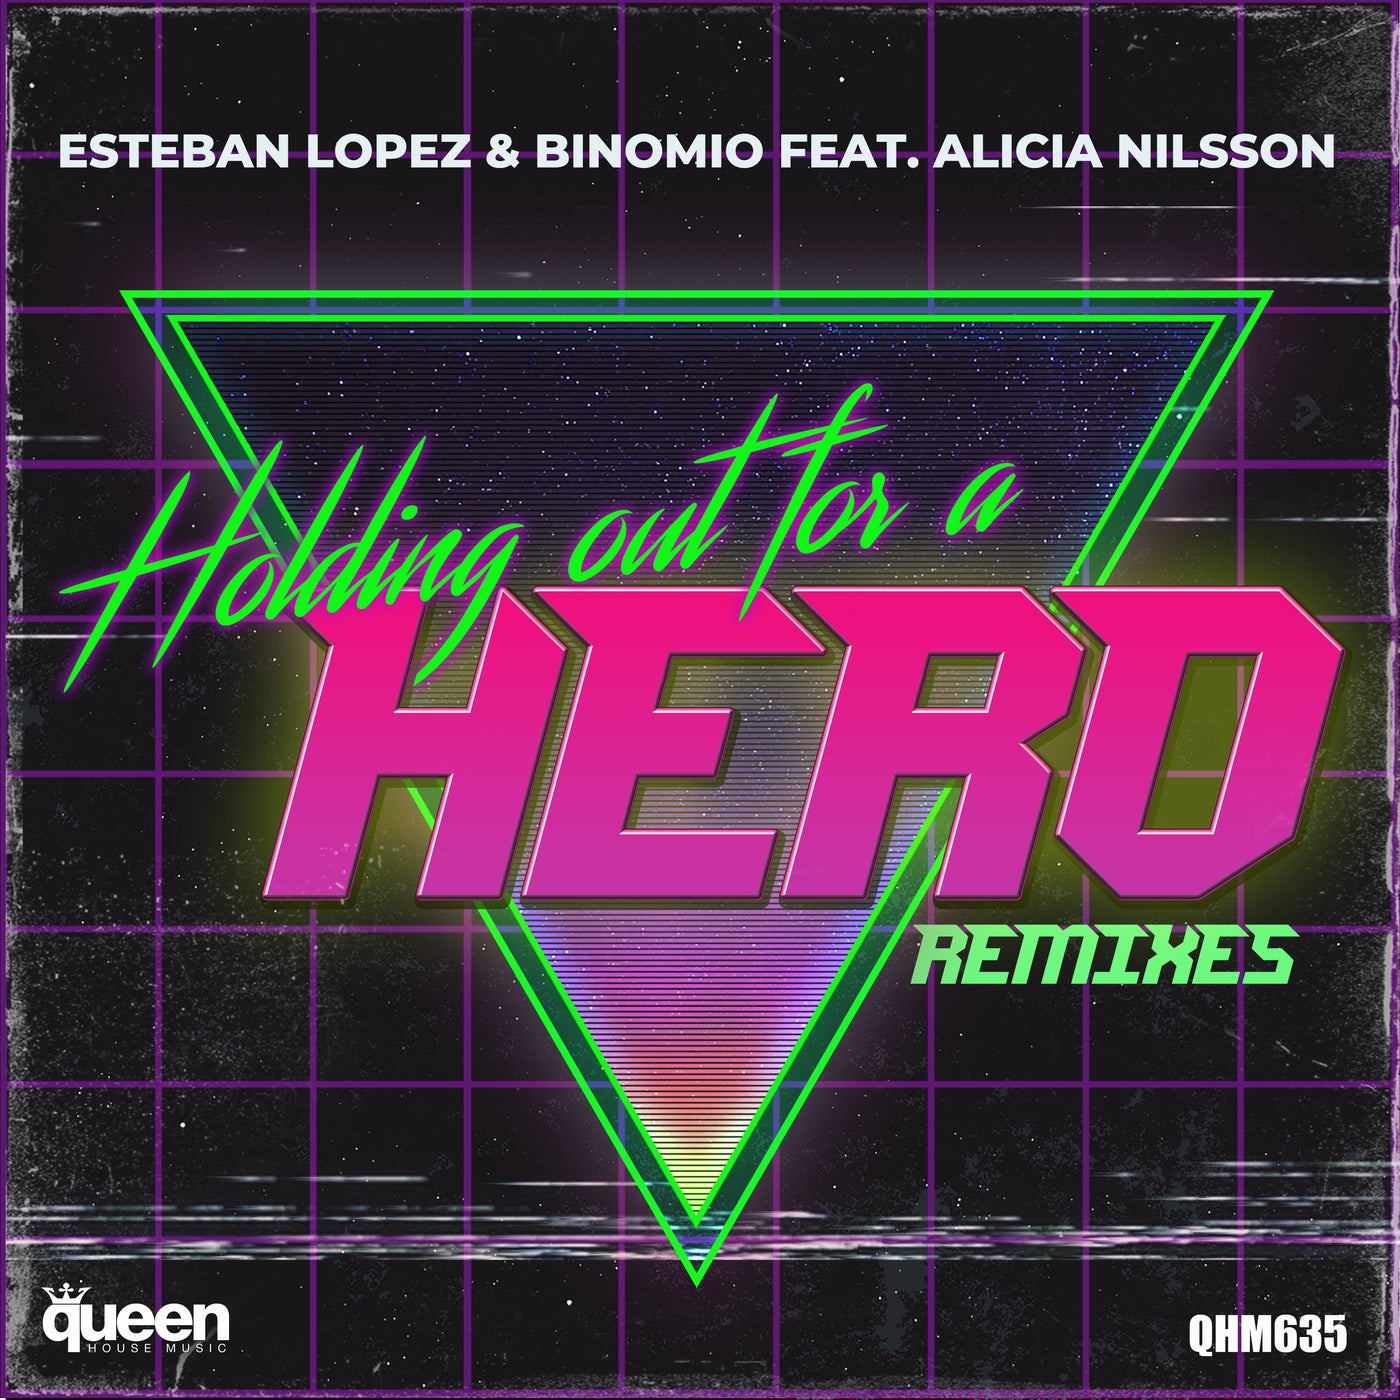 Holding out for a Hero (Remixes)